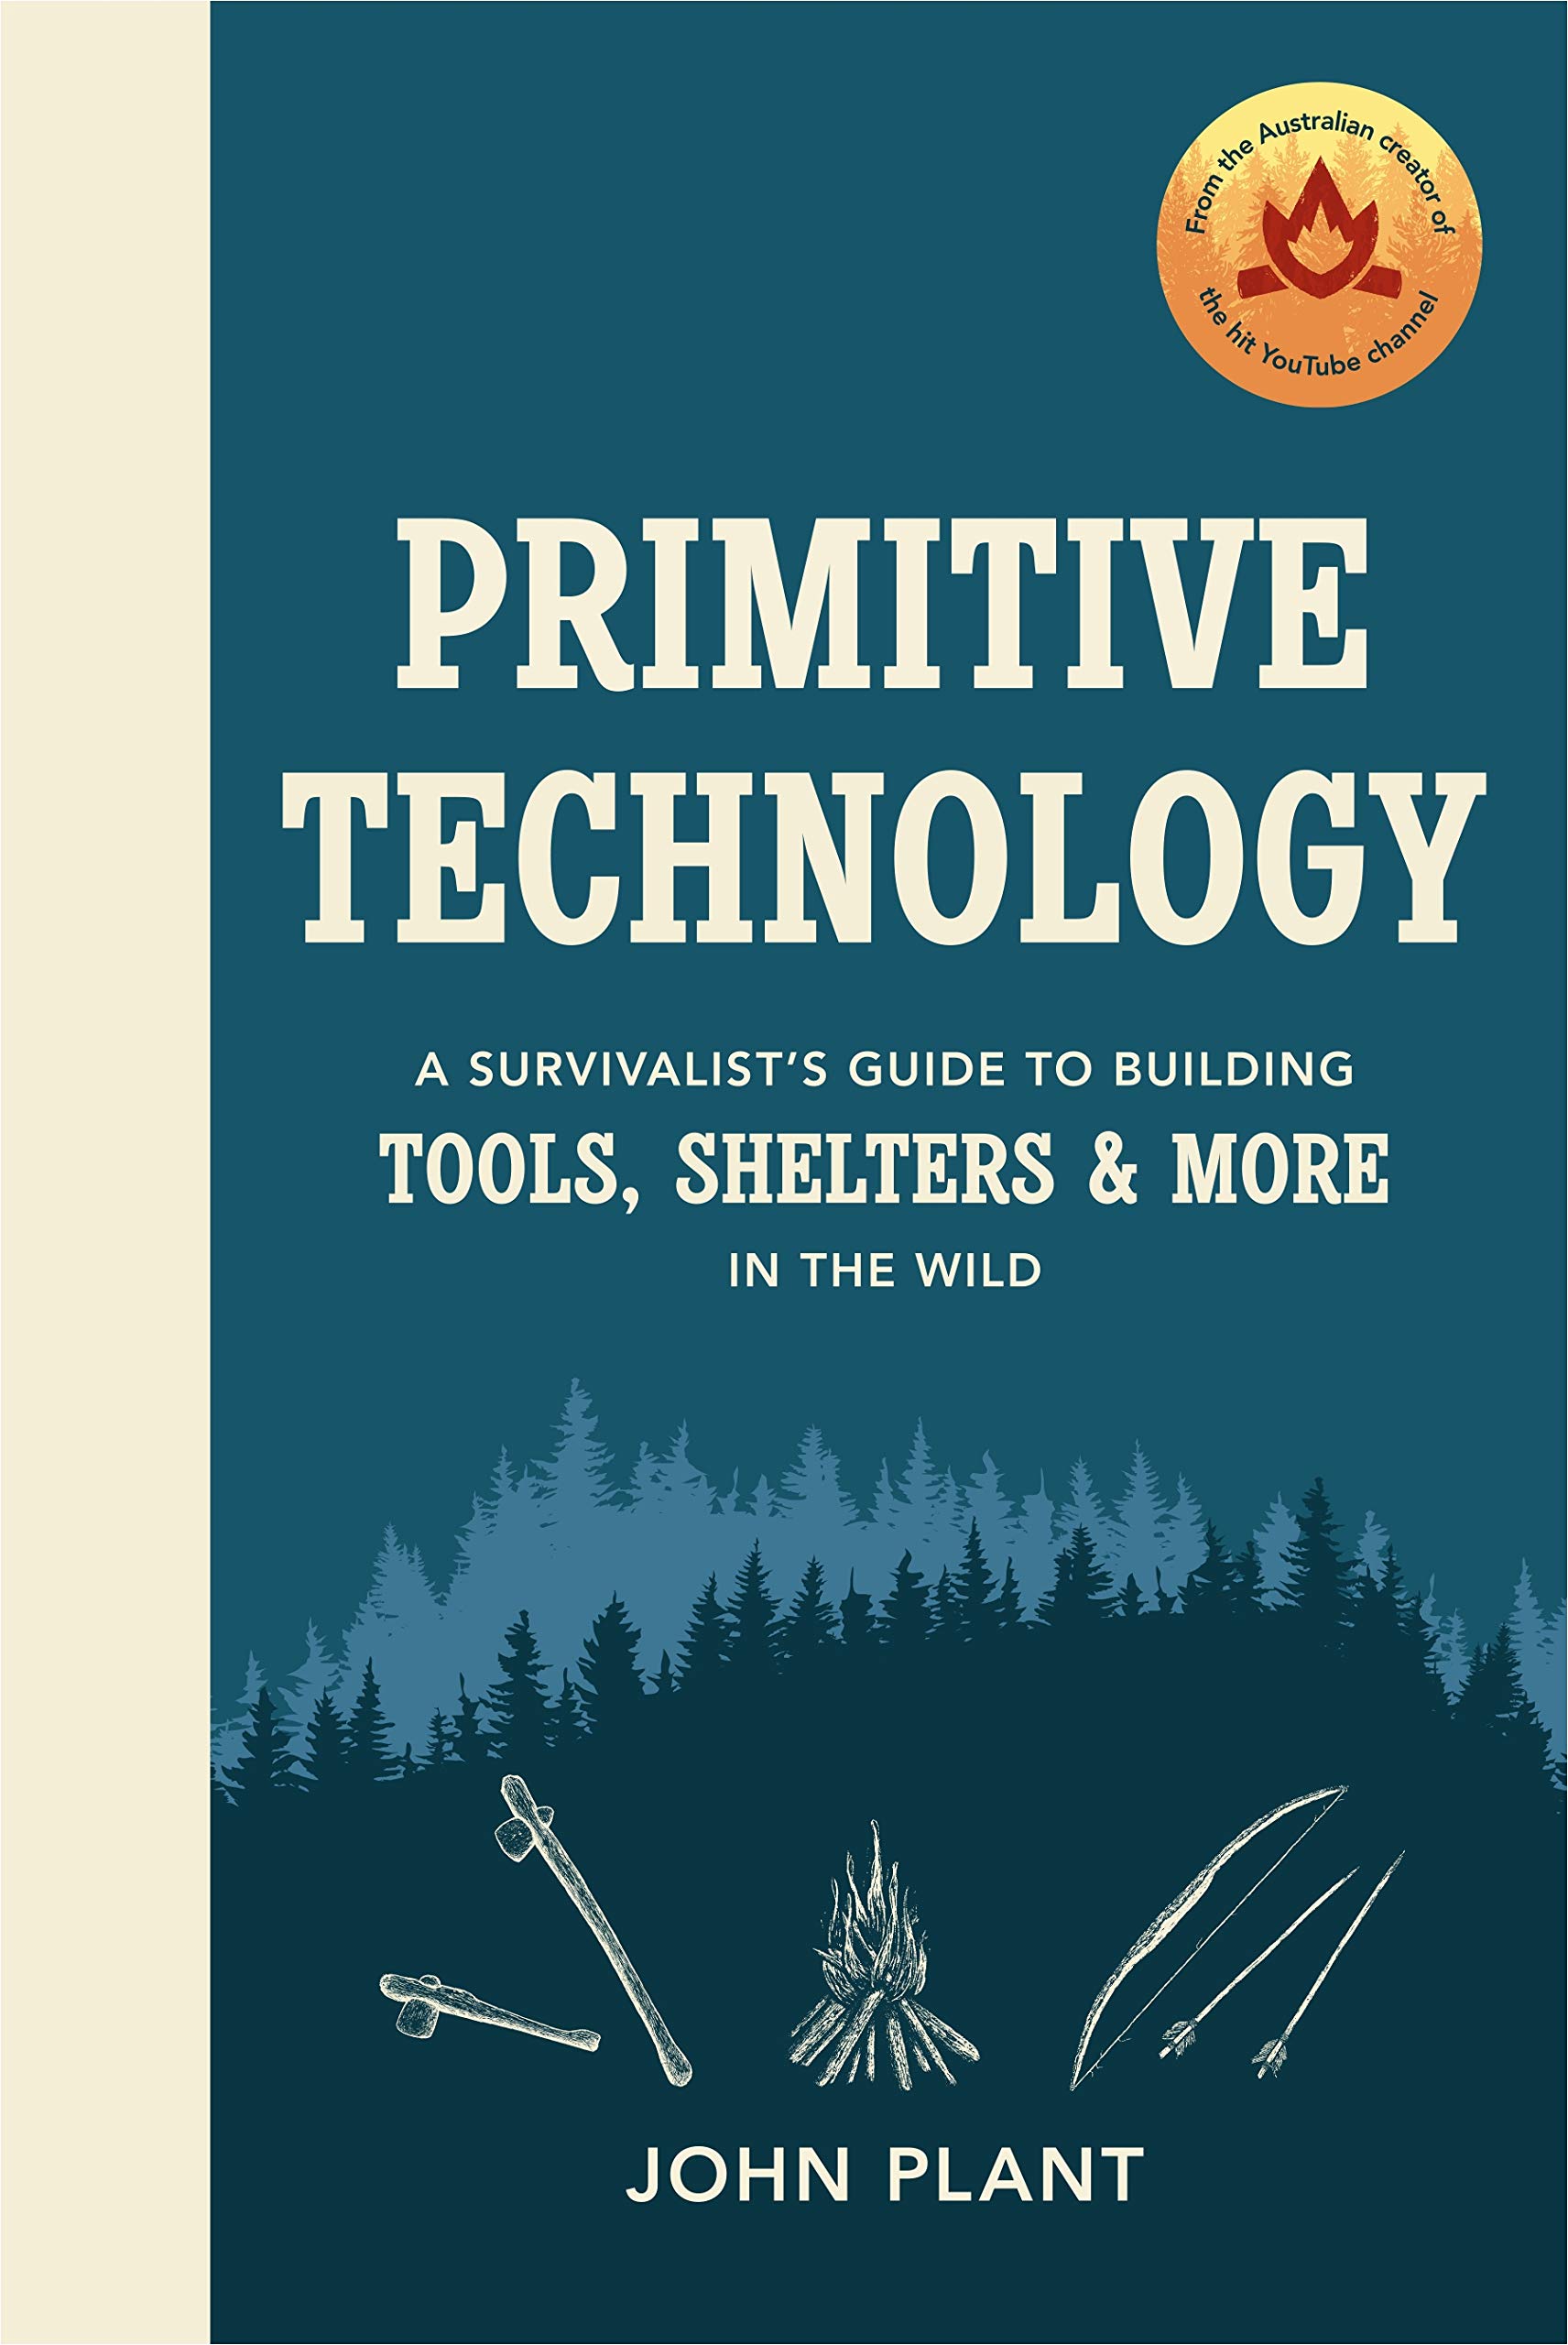 Primitive Technology: A Survivalist's Guide to Building Tools, Shelters & More in the Wild, by John Plant - Survival Books - Survival, Sustainable Living